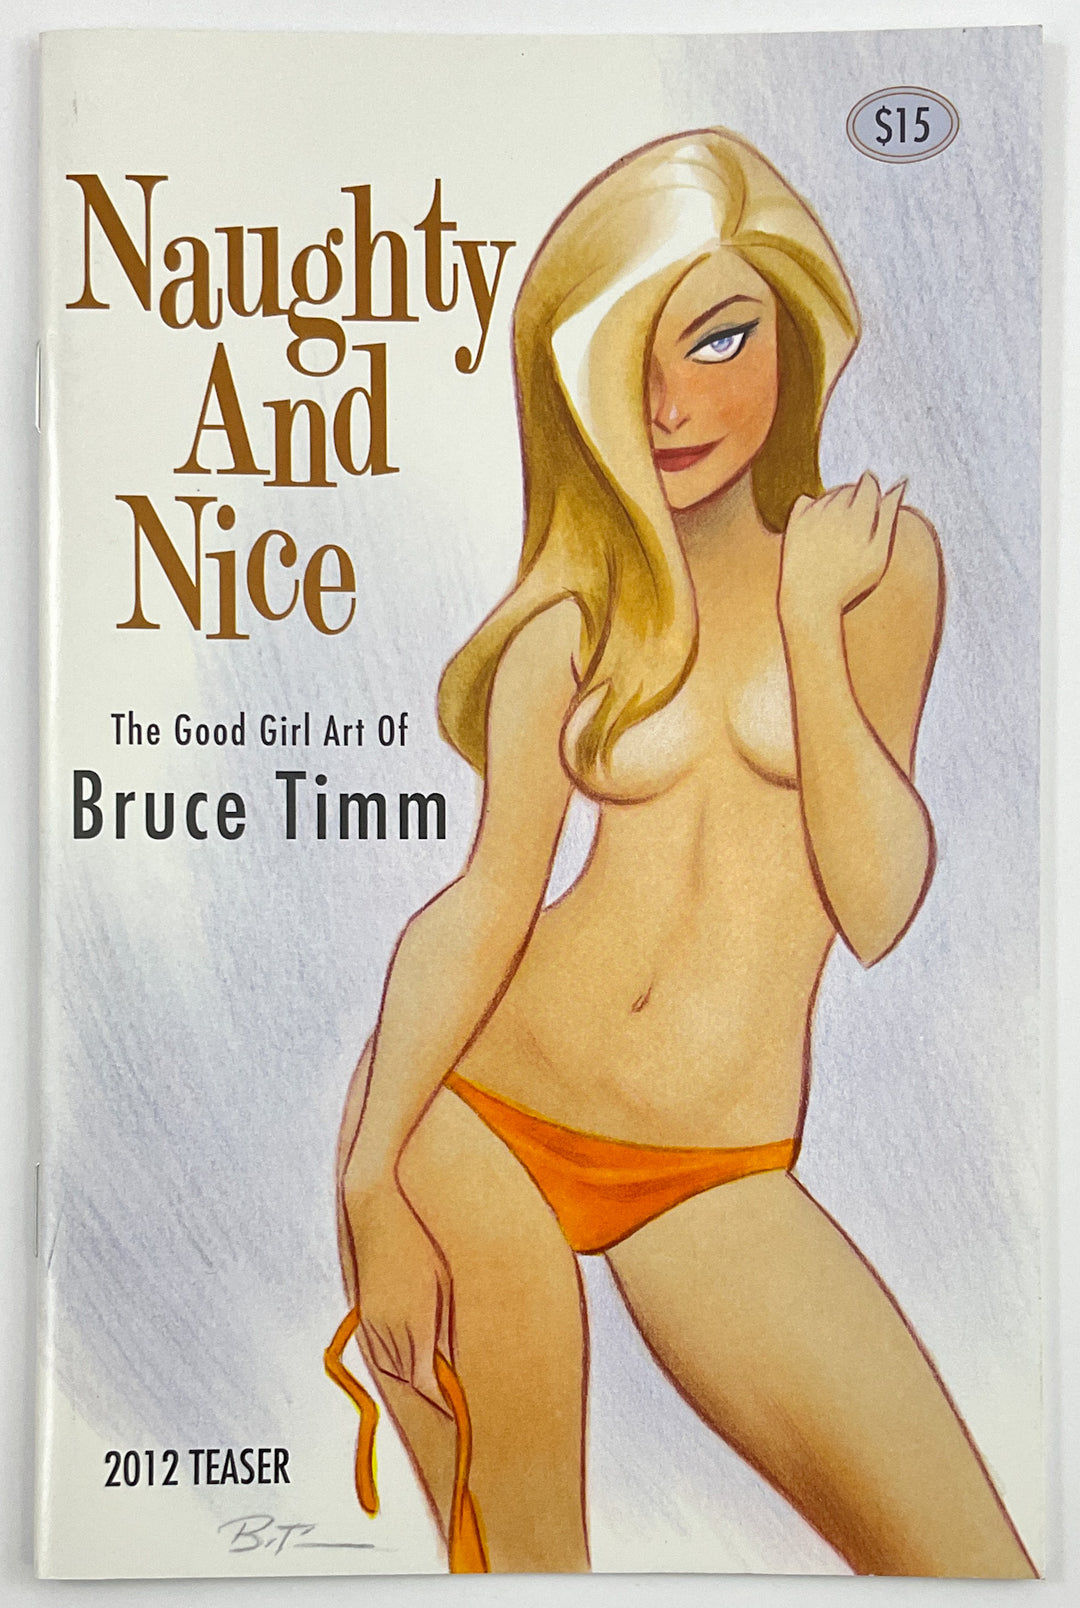 Naughty and Nice: The Good Girl Art of Bruce Timm 2012 Teaser - Signed